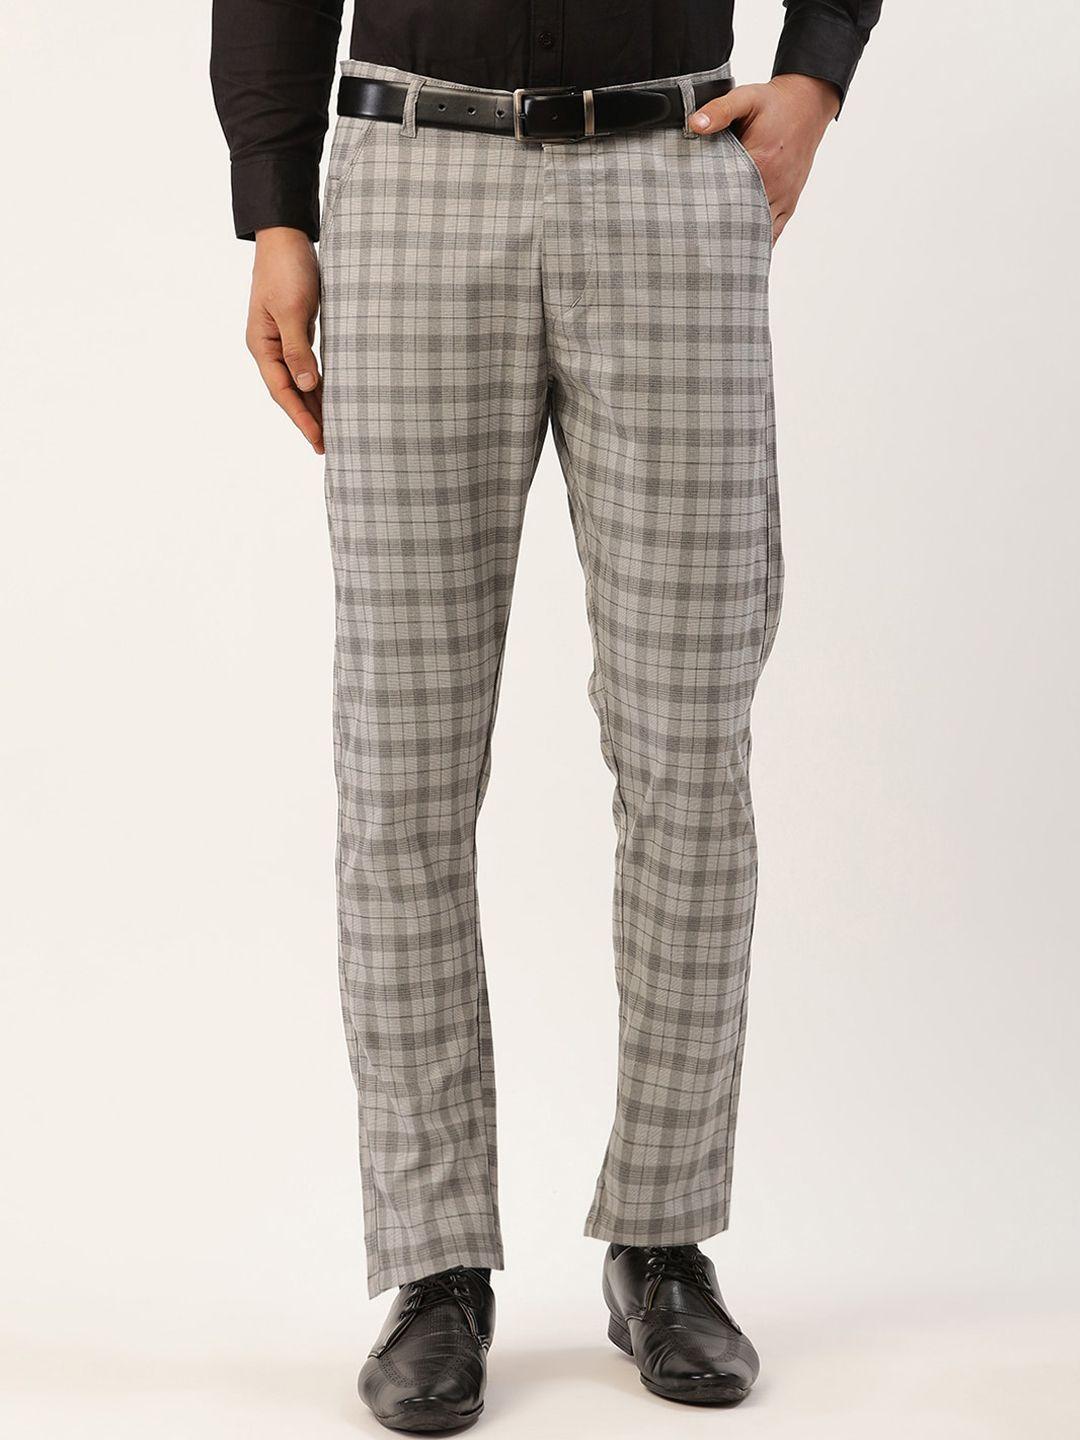 jainish-men-grey-checked-tailored-slim-fit-easy-wash-trousers